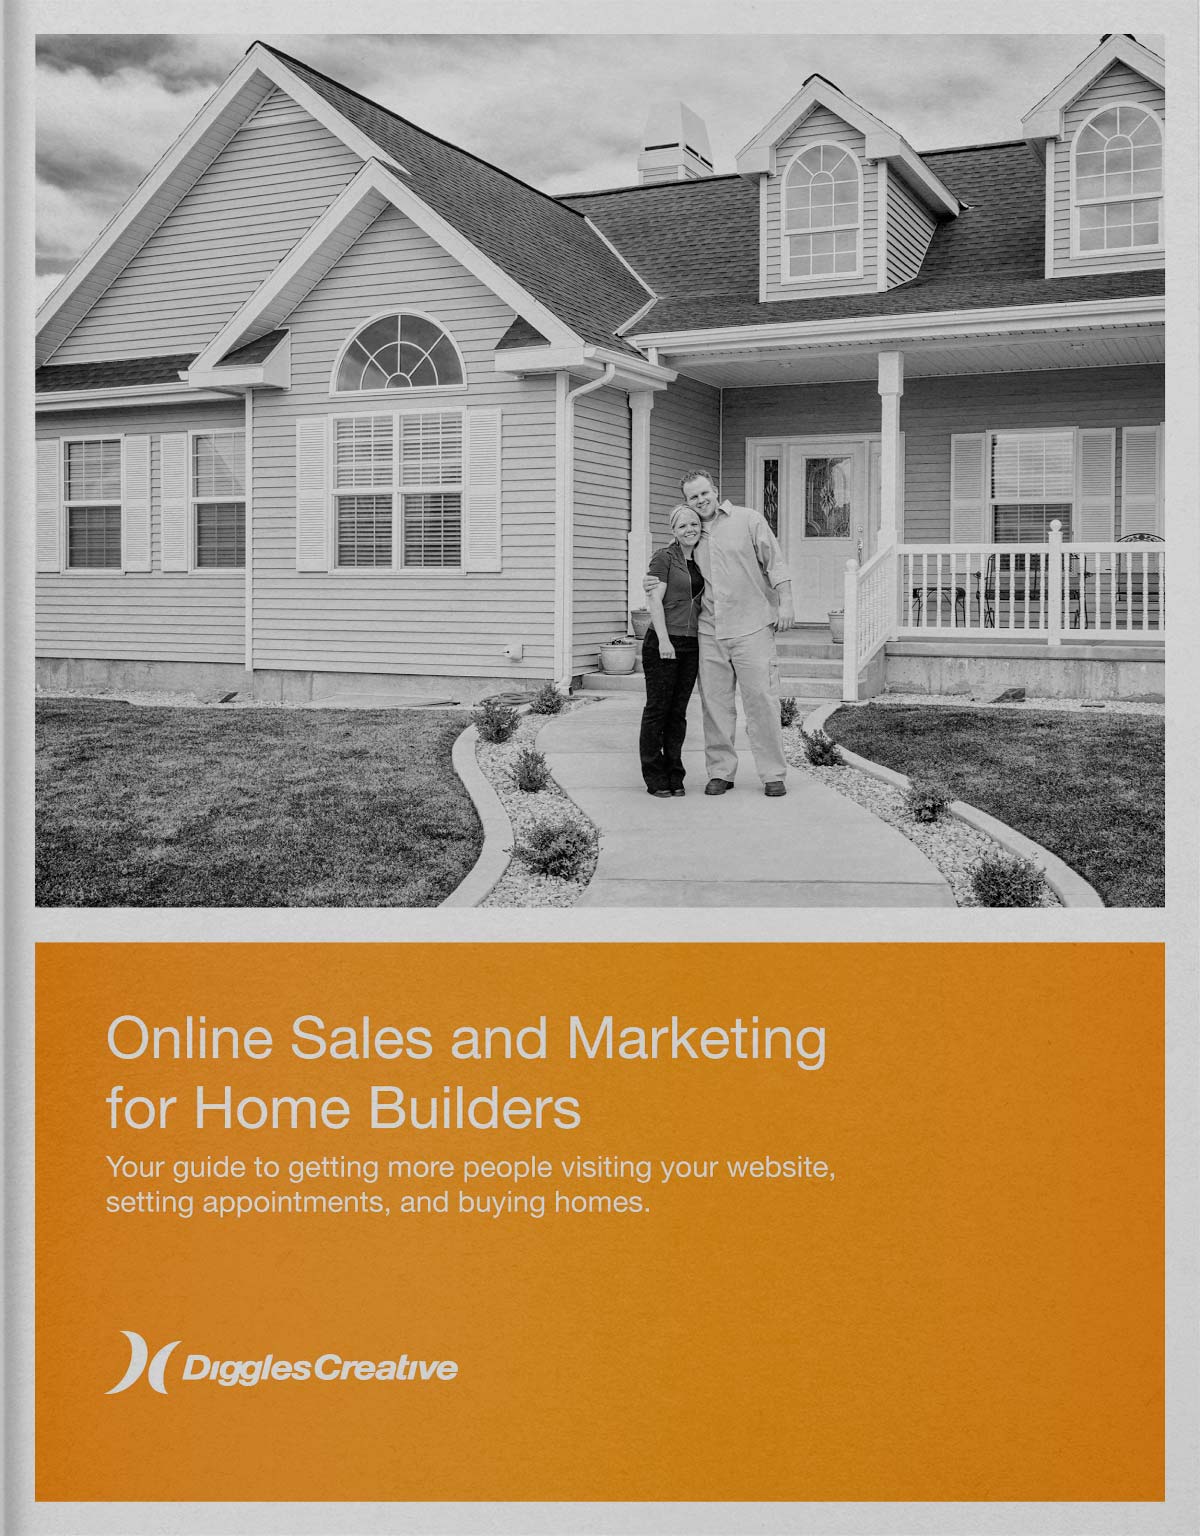 Ebook - Online Sales and Marketing for Home Builders